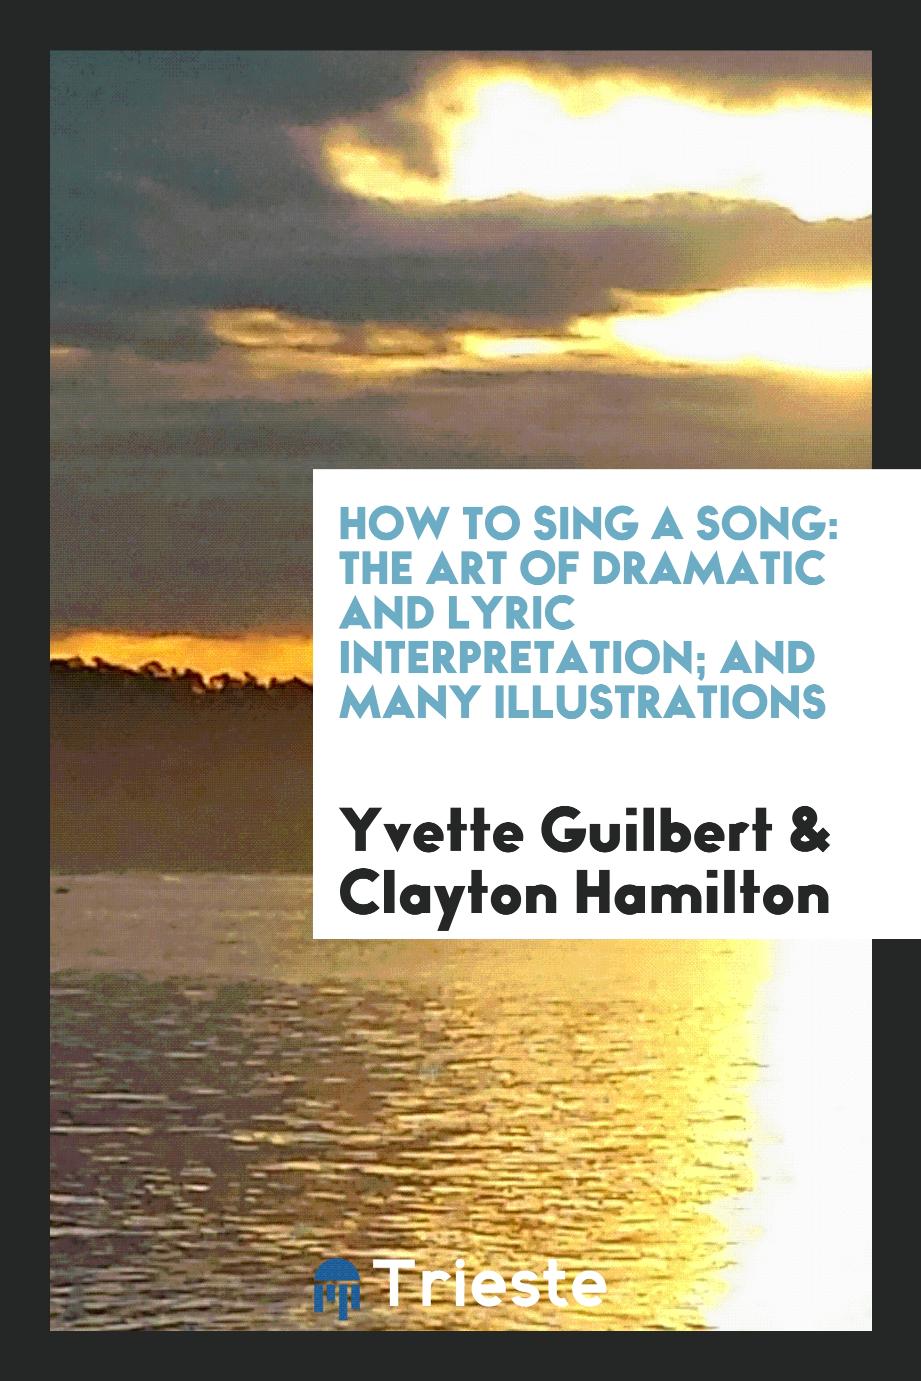 How to Sing a Song: The Art of Dramatic and Lyric Interpretation; And Many Illustrations